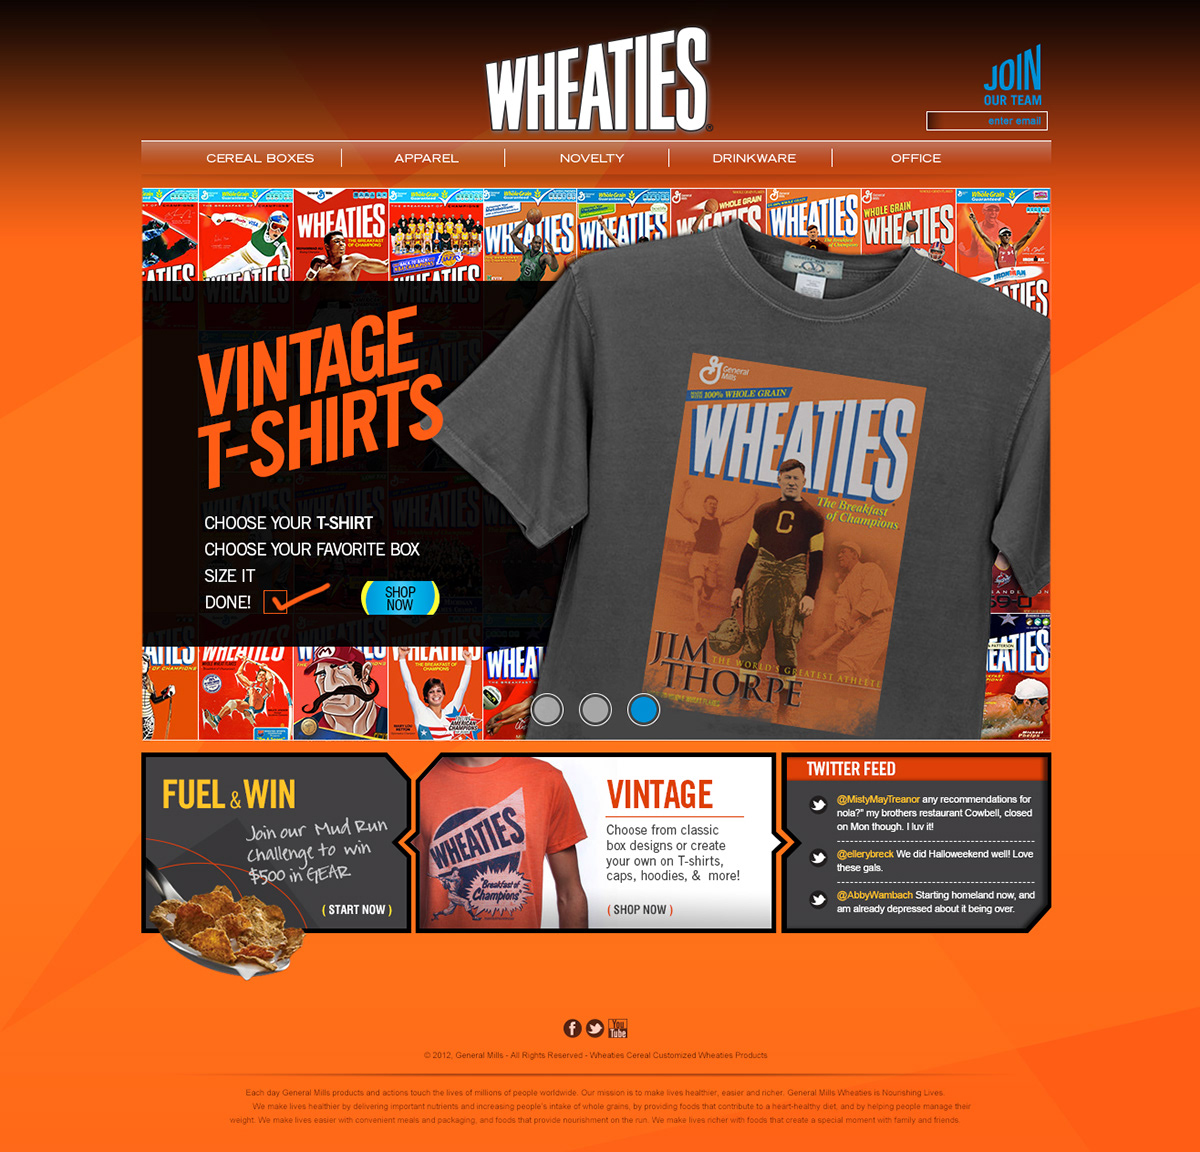 Wheaties  cereal  general mills  fuel  promotion  social   apparel